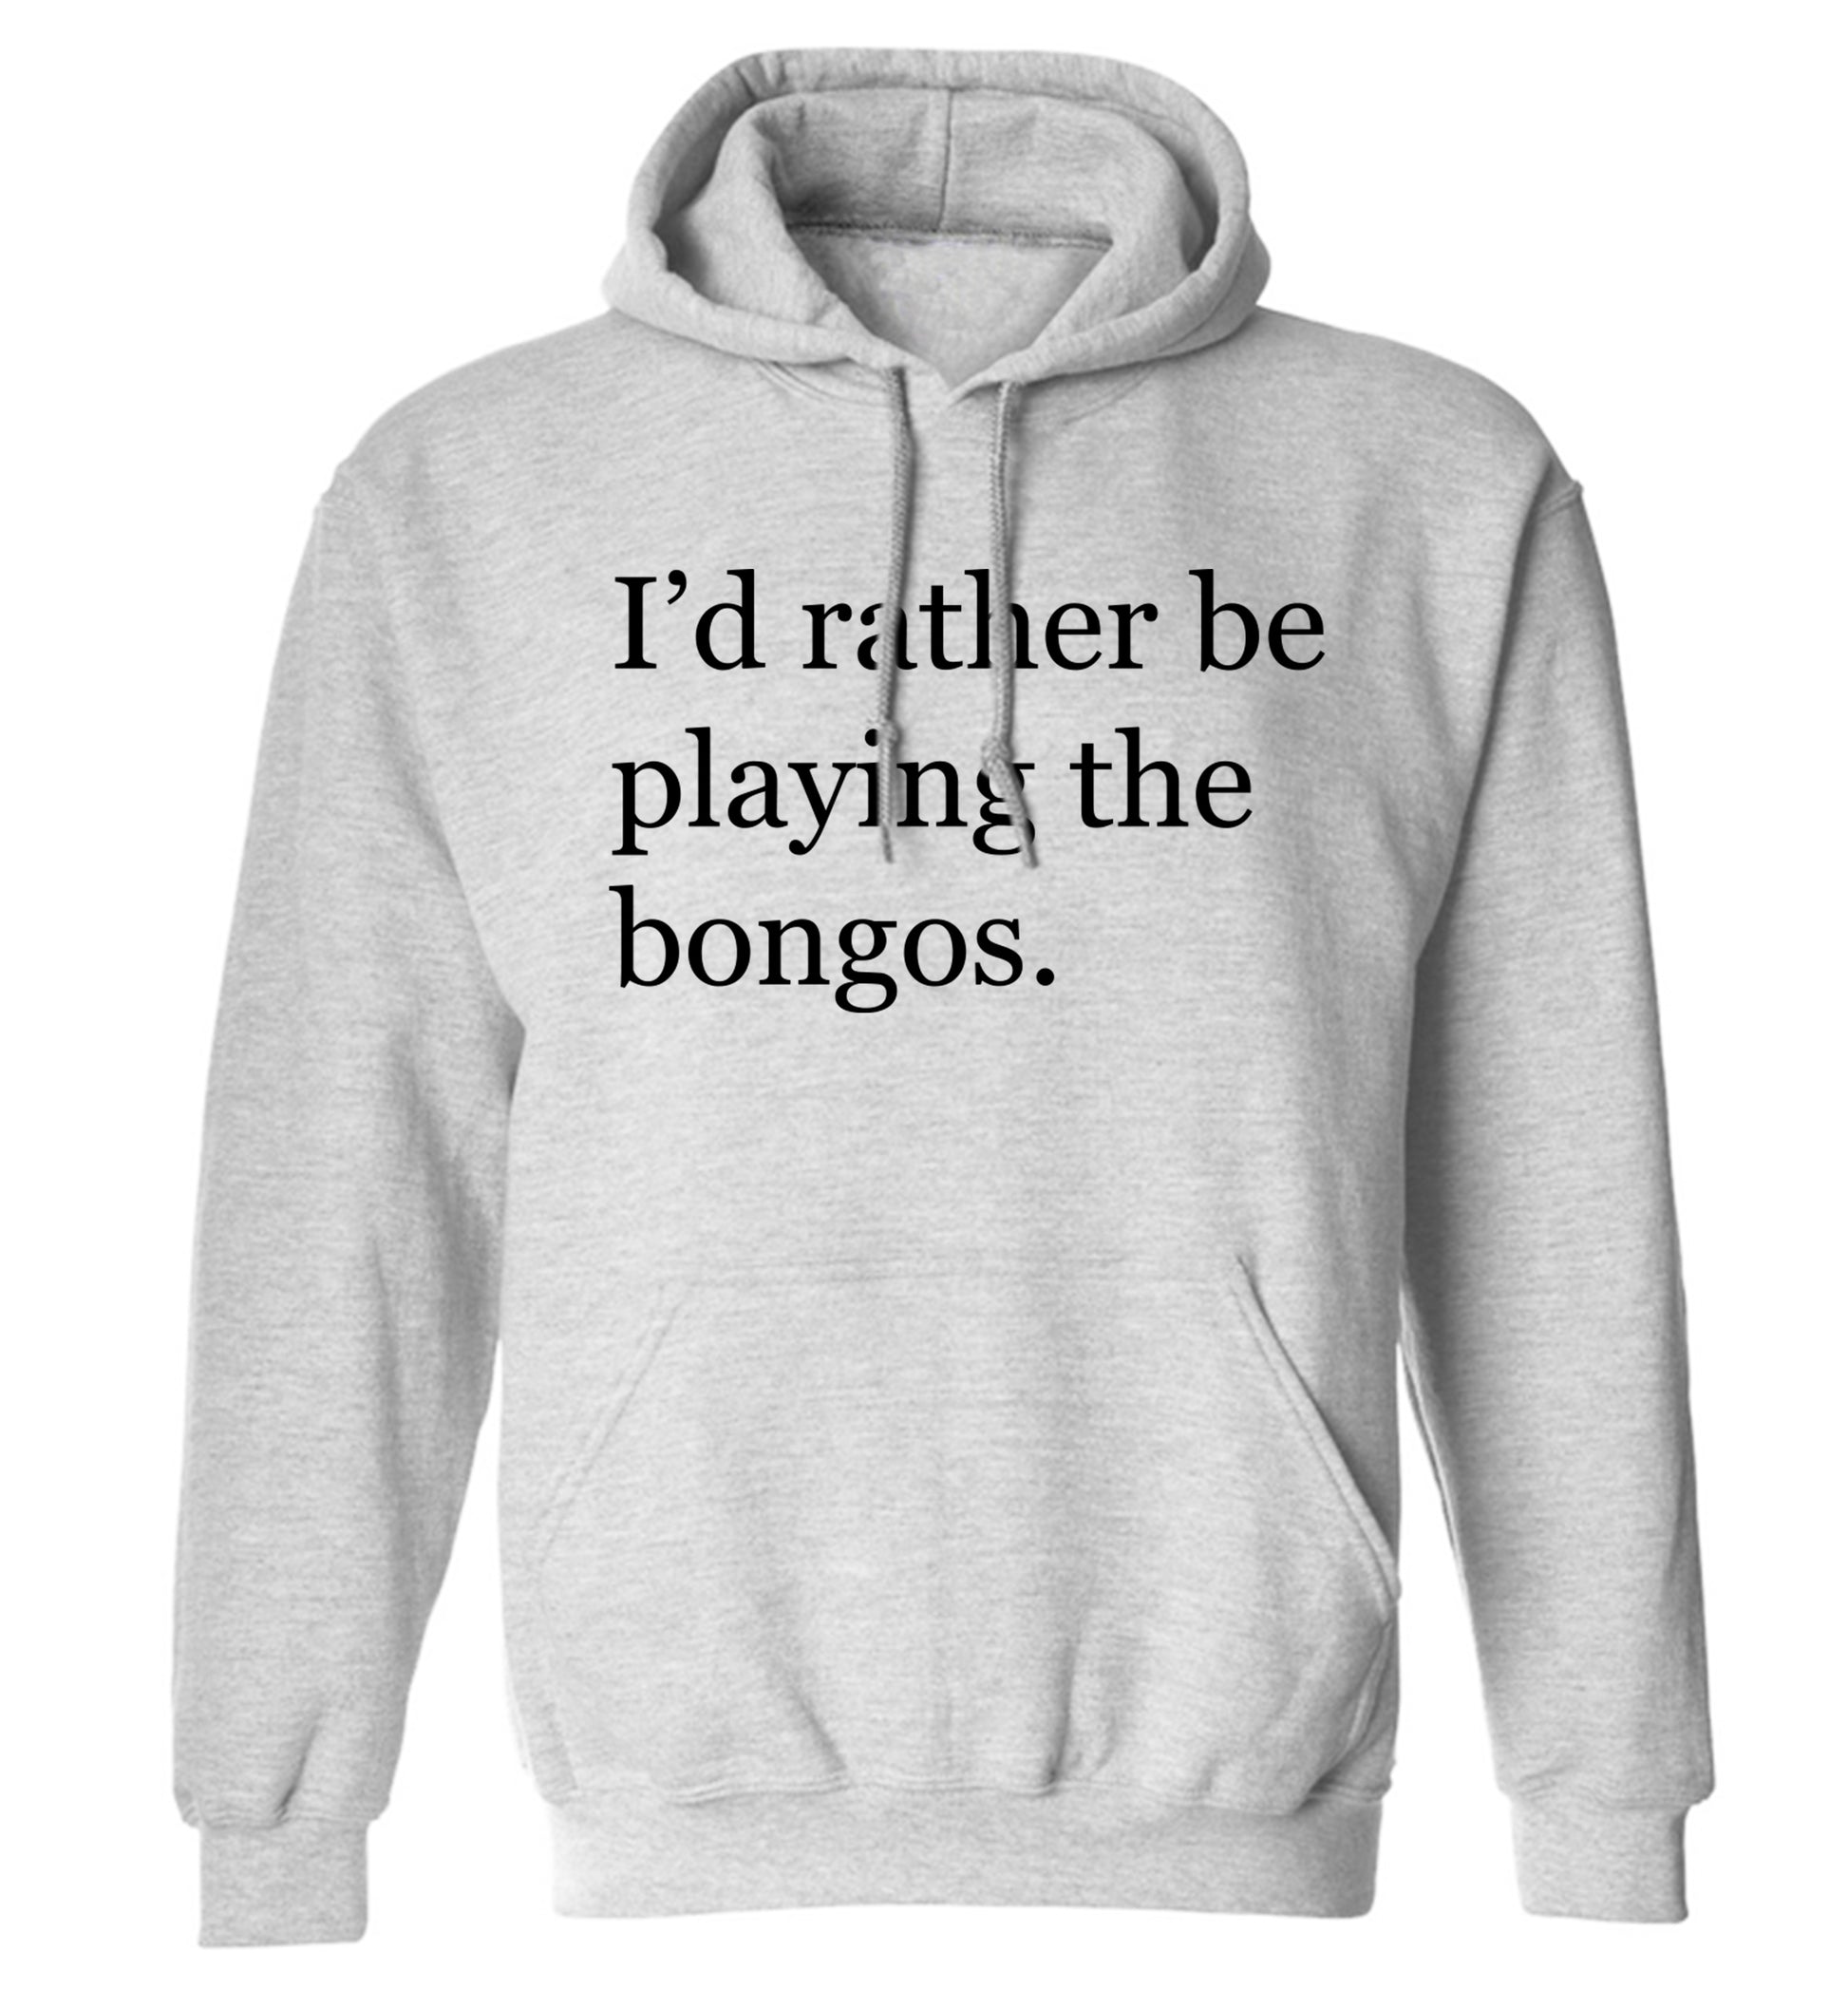 I'd rather be playing the bongos adults unisexgrey hoodie 2XL